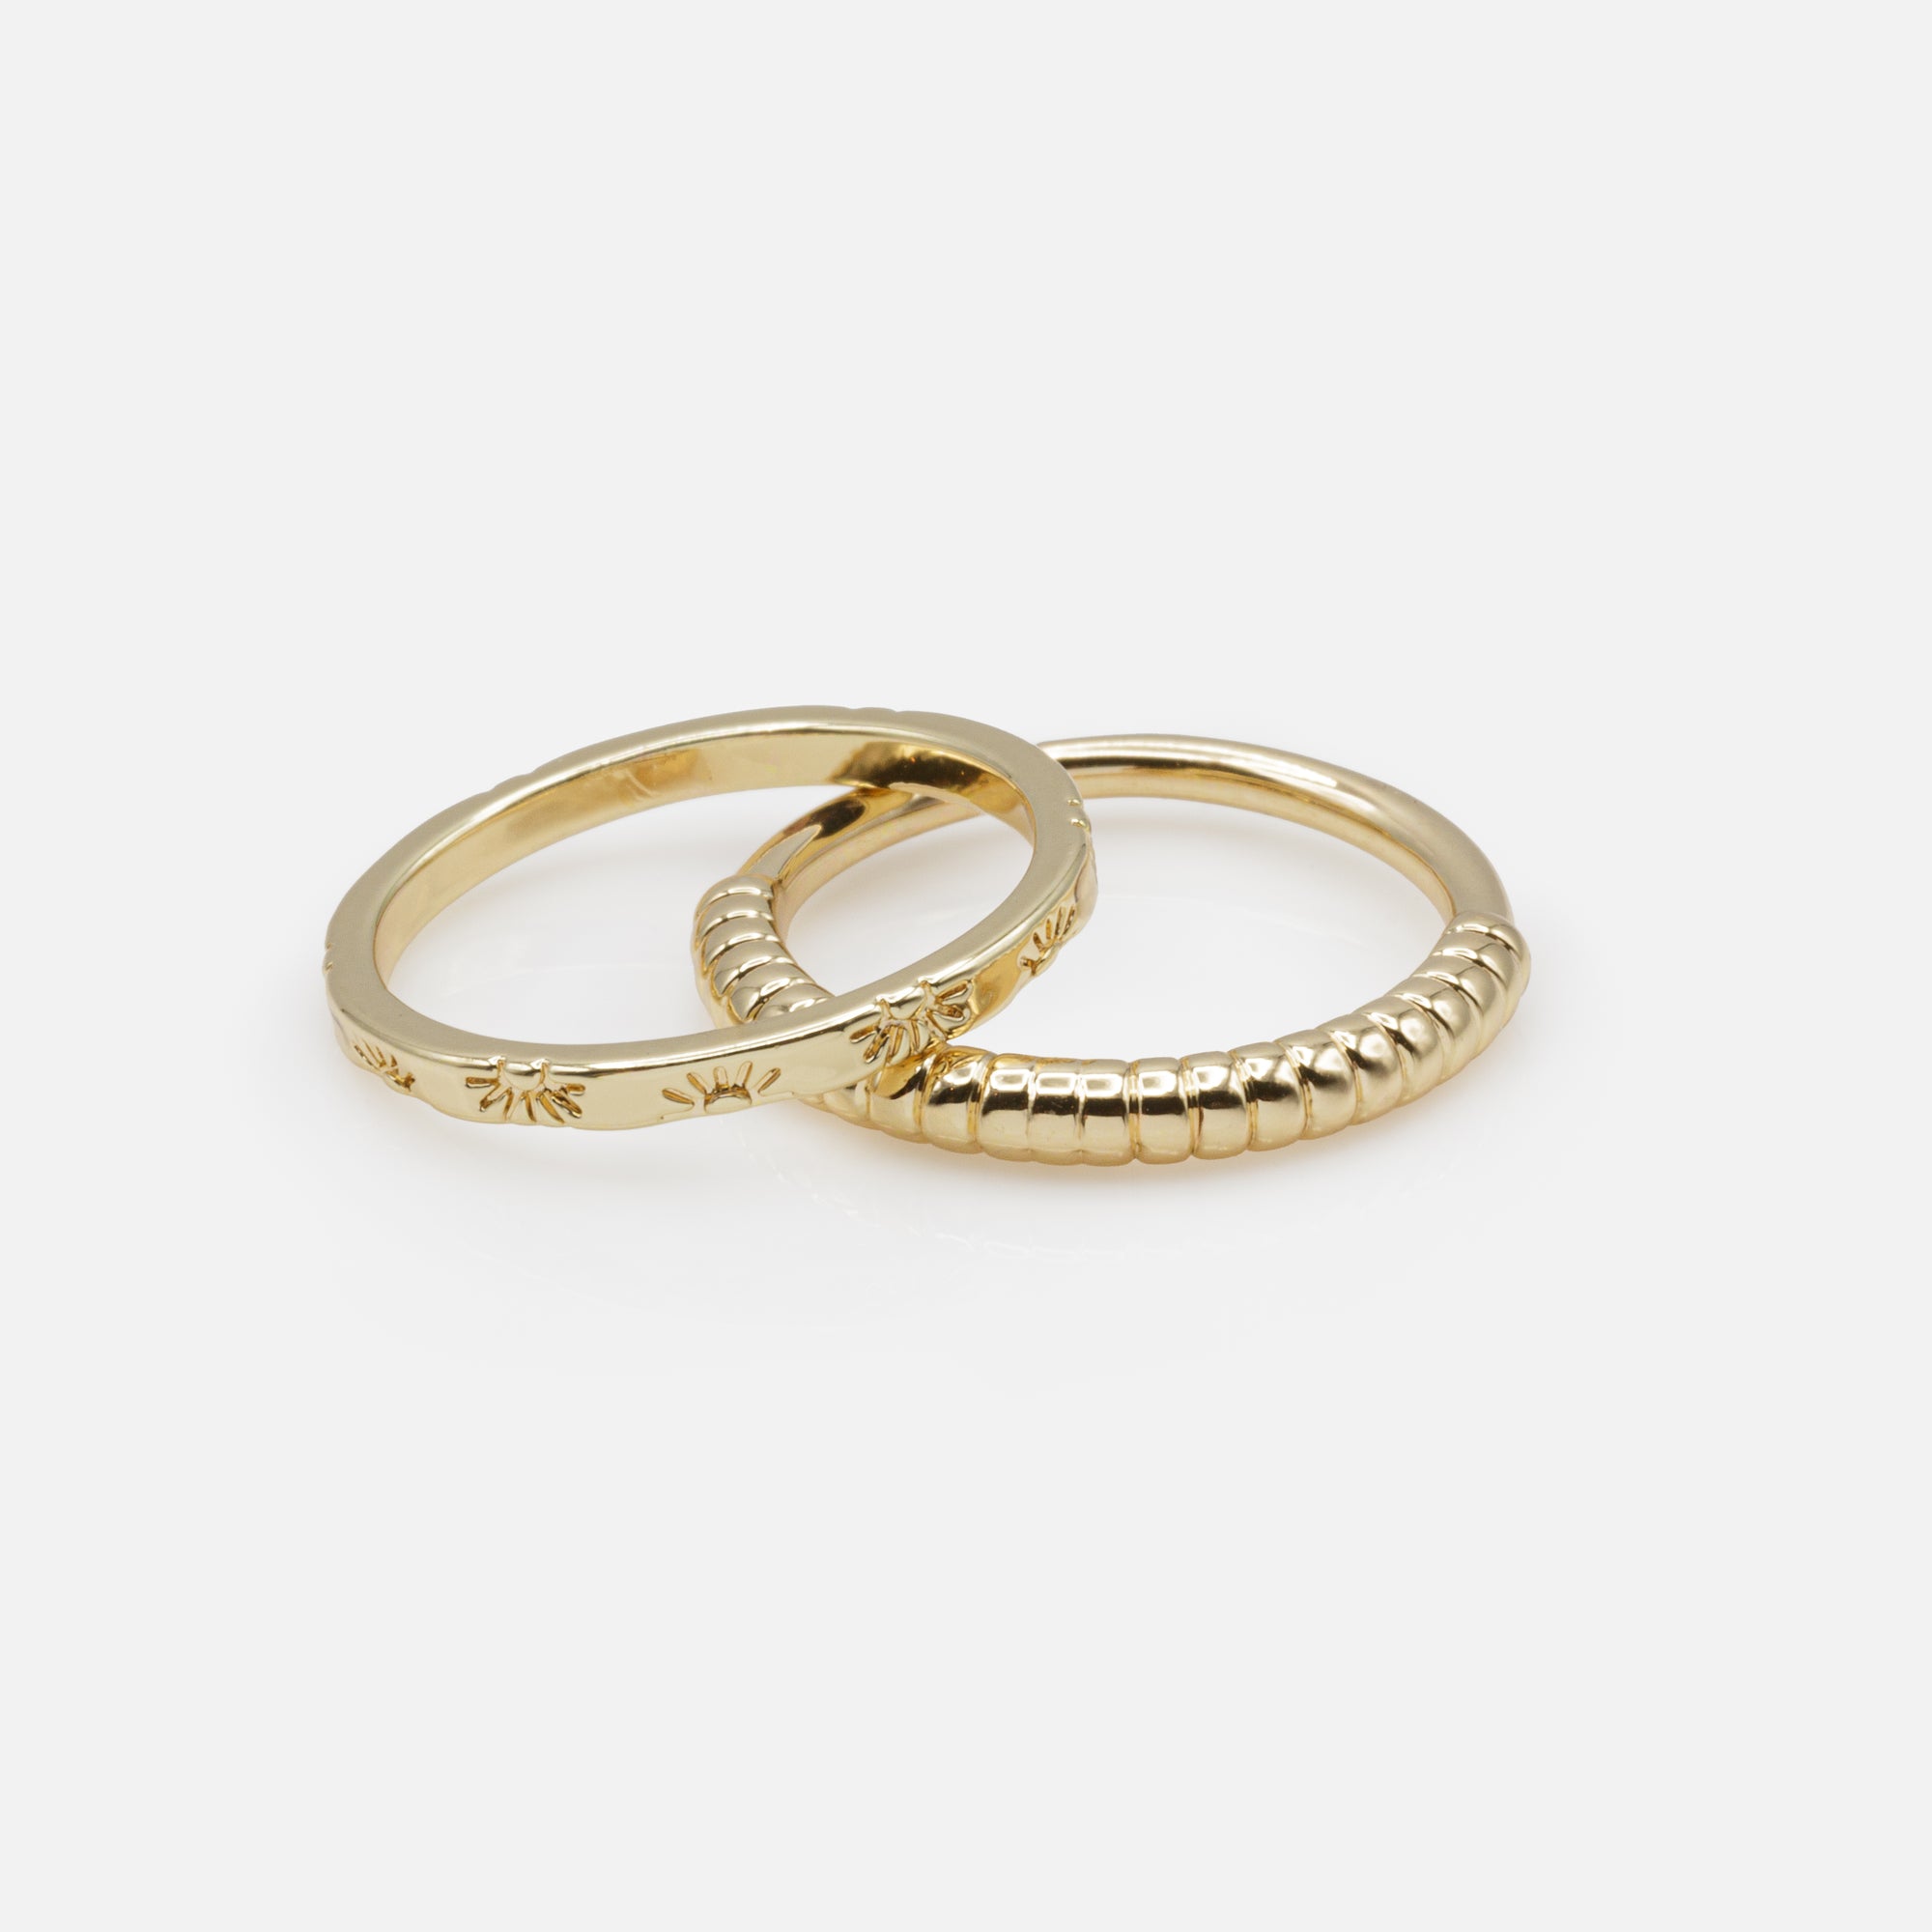 Duo of golden sunset rings